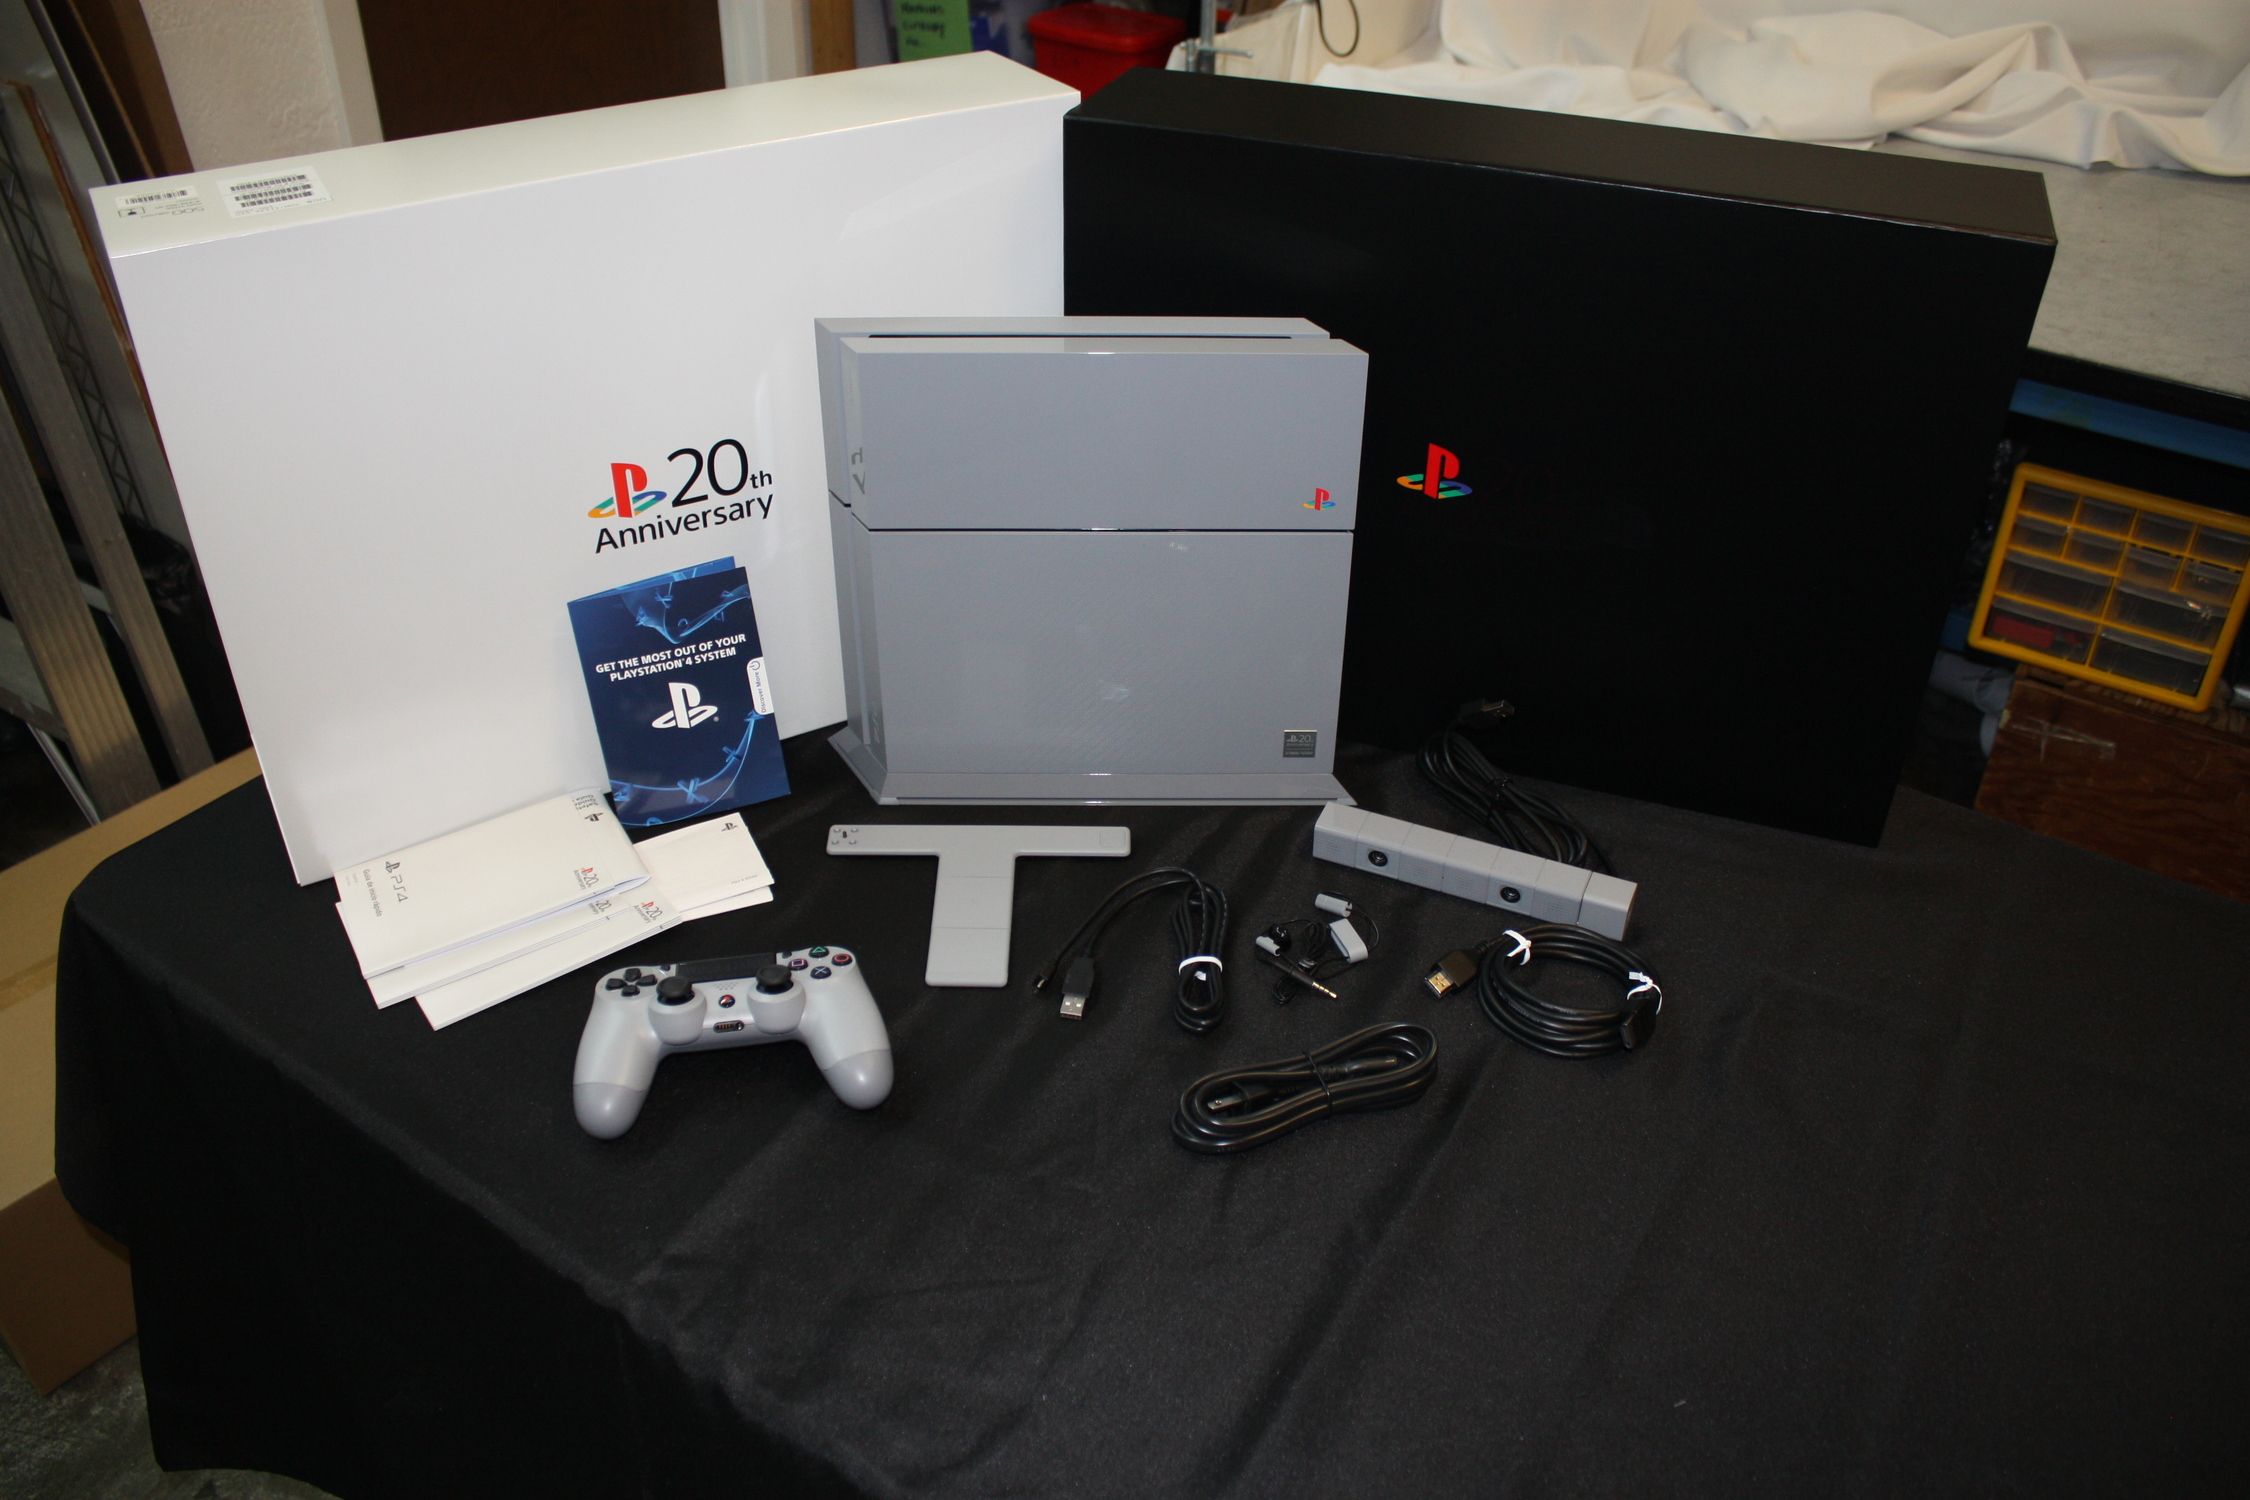 Sony Playstation 4 (PS4) 20th Anniversary Edition · Digital Game